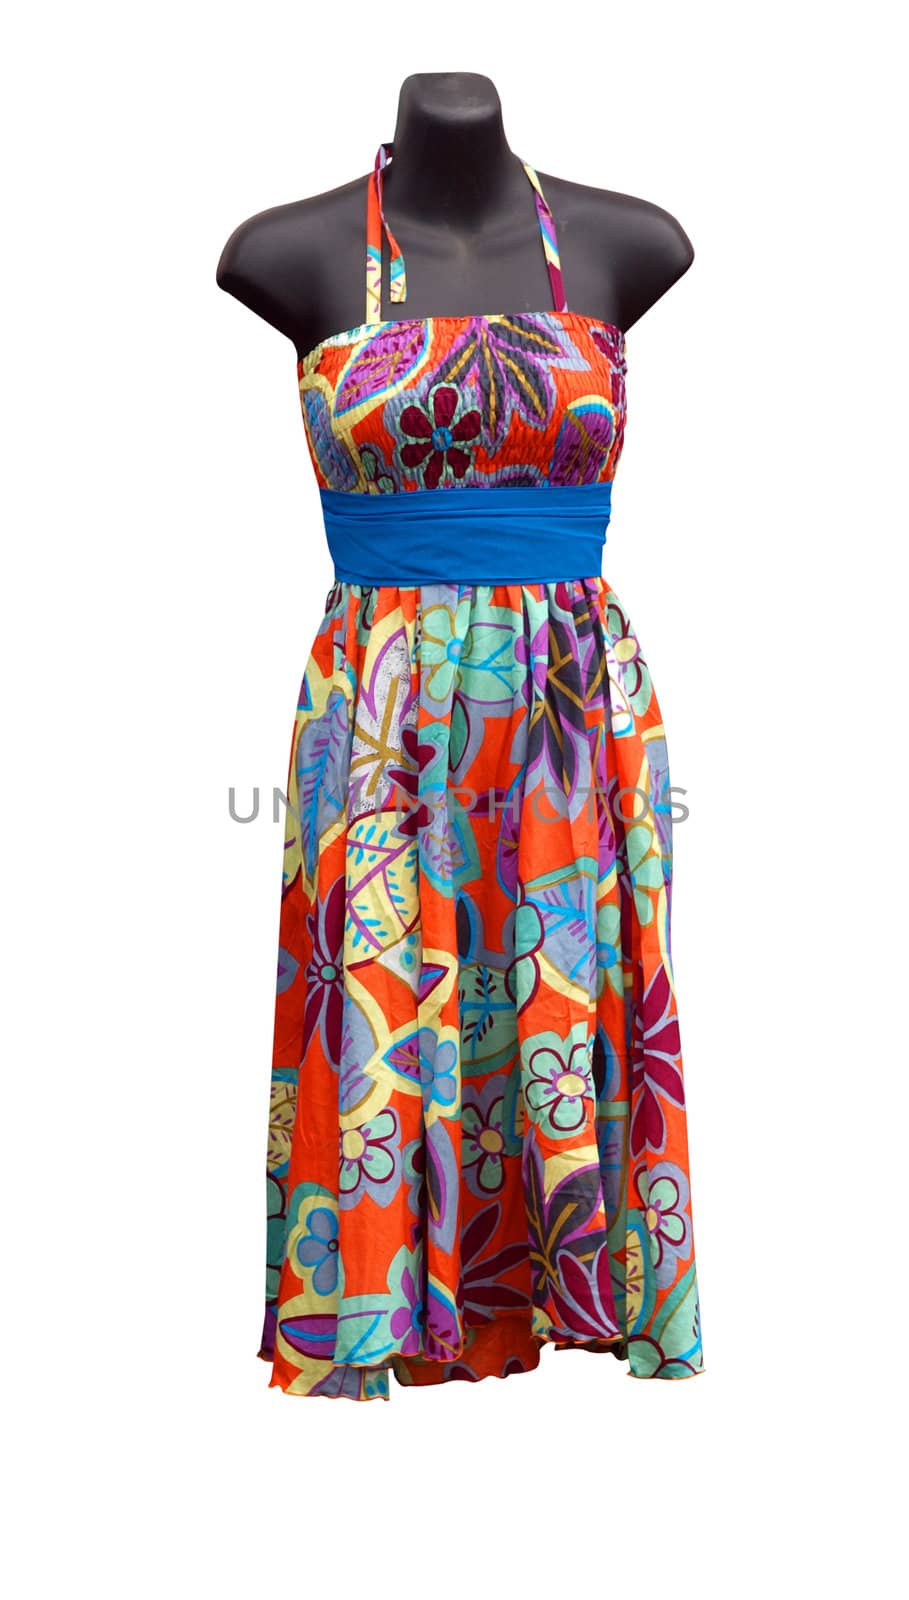 Shop Mannequin wearing a floral Dress isolated with clipping path